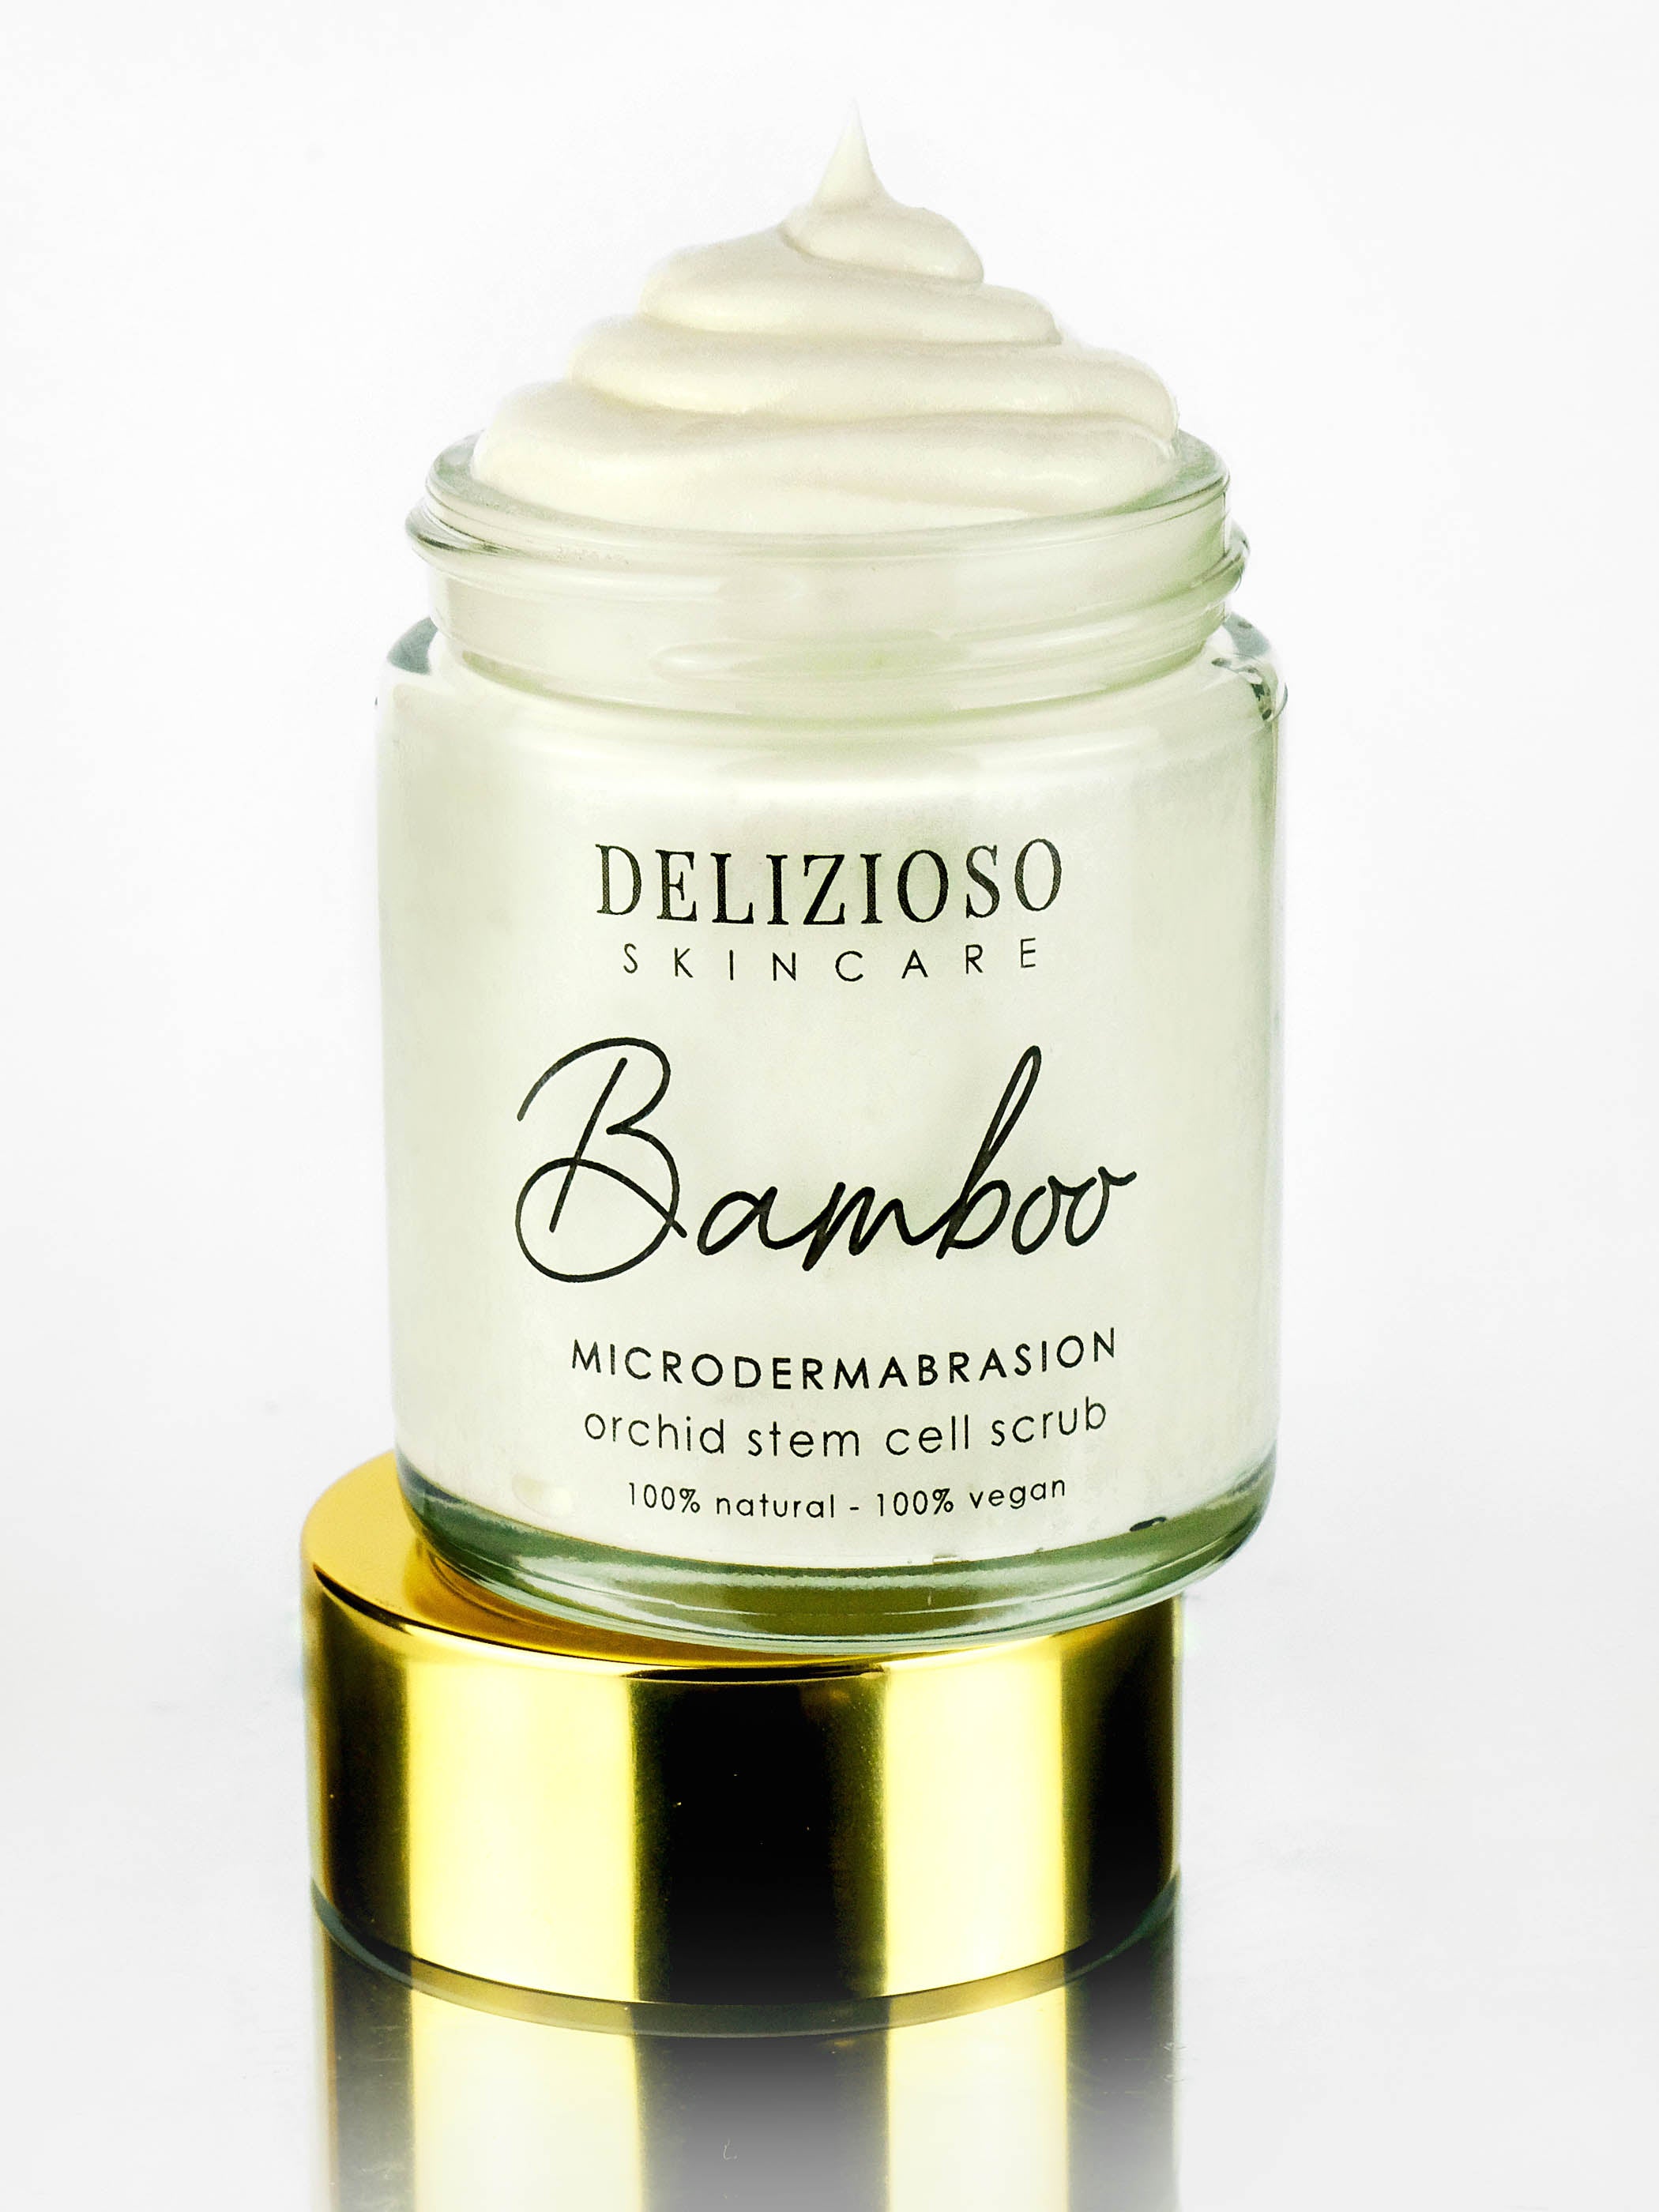 Bamboo Microdermabrasion Orchid Stem Cell Scrub